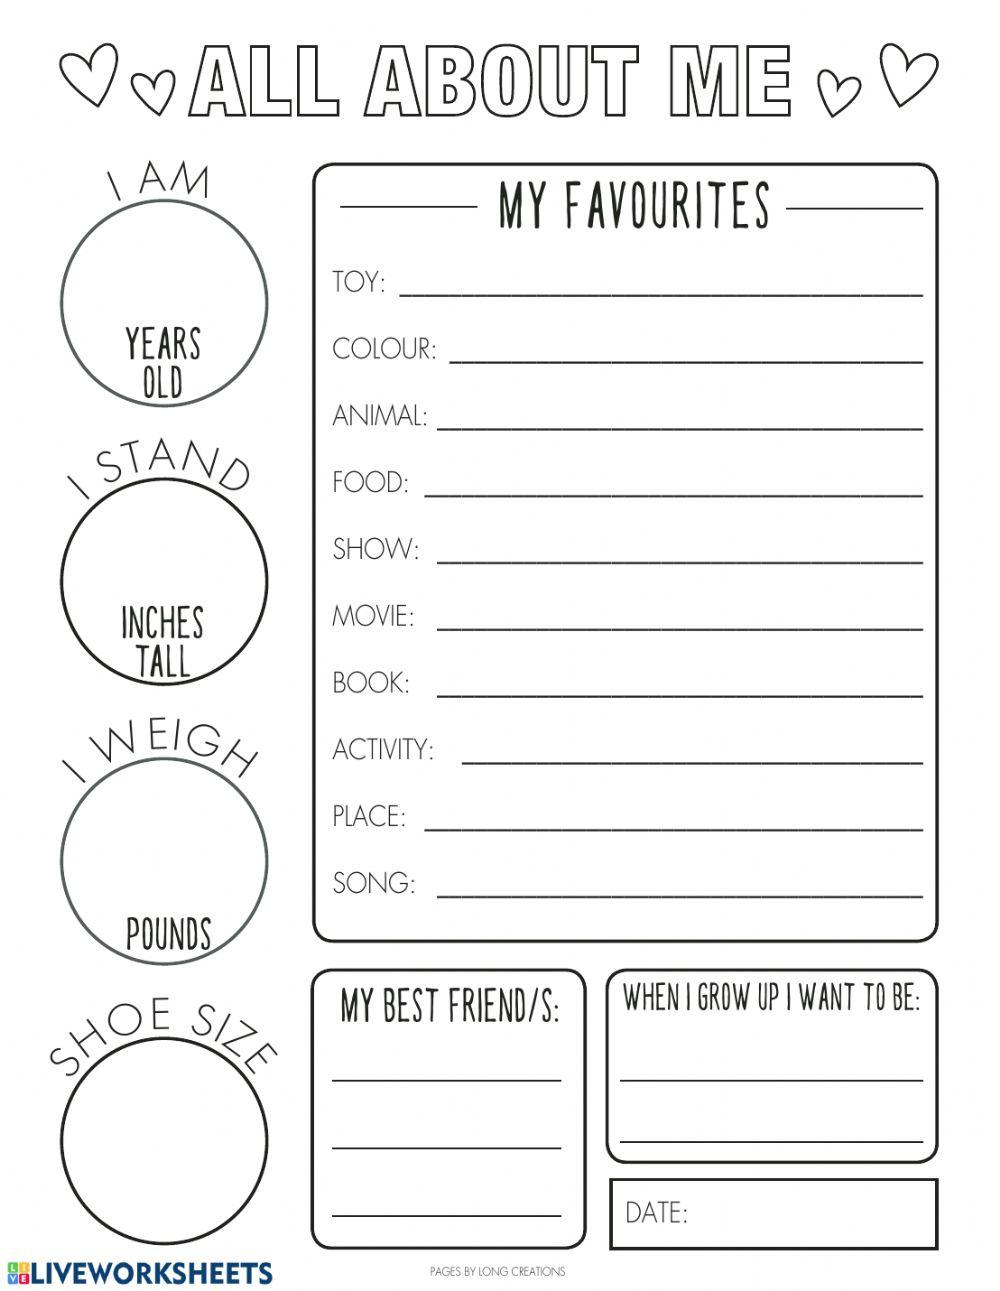 COVID-19 - Time Capsule - All Abou Me - Feeling worksheet | Live Worksheets